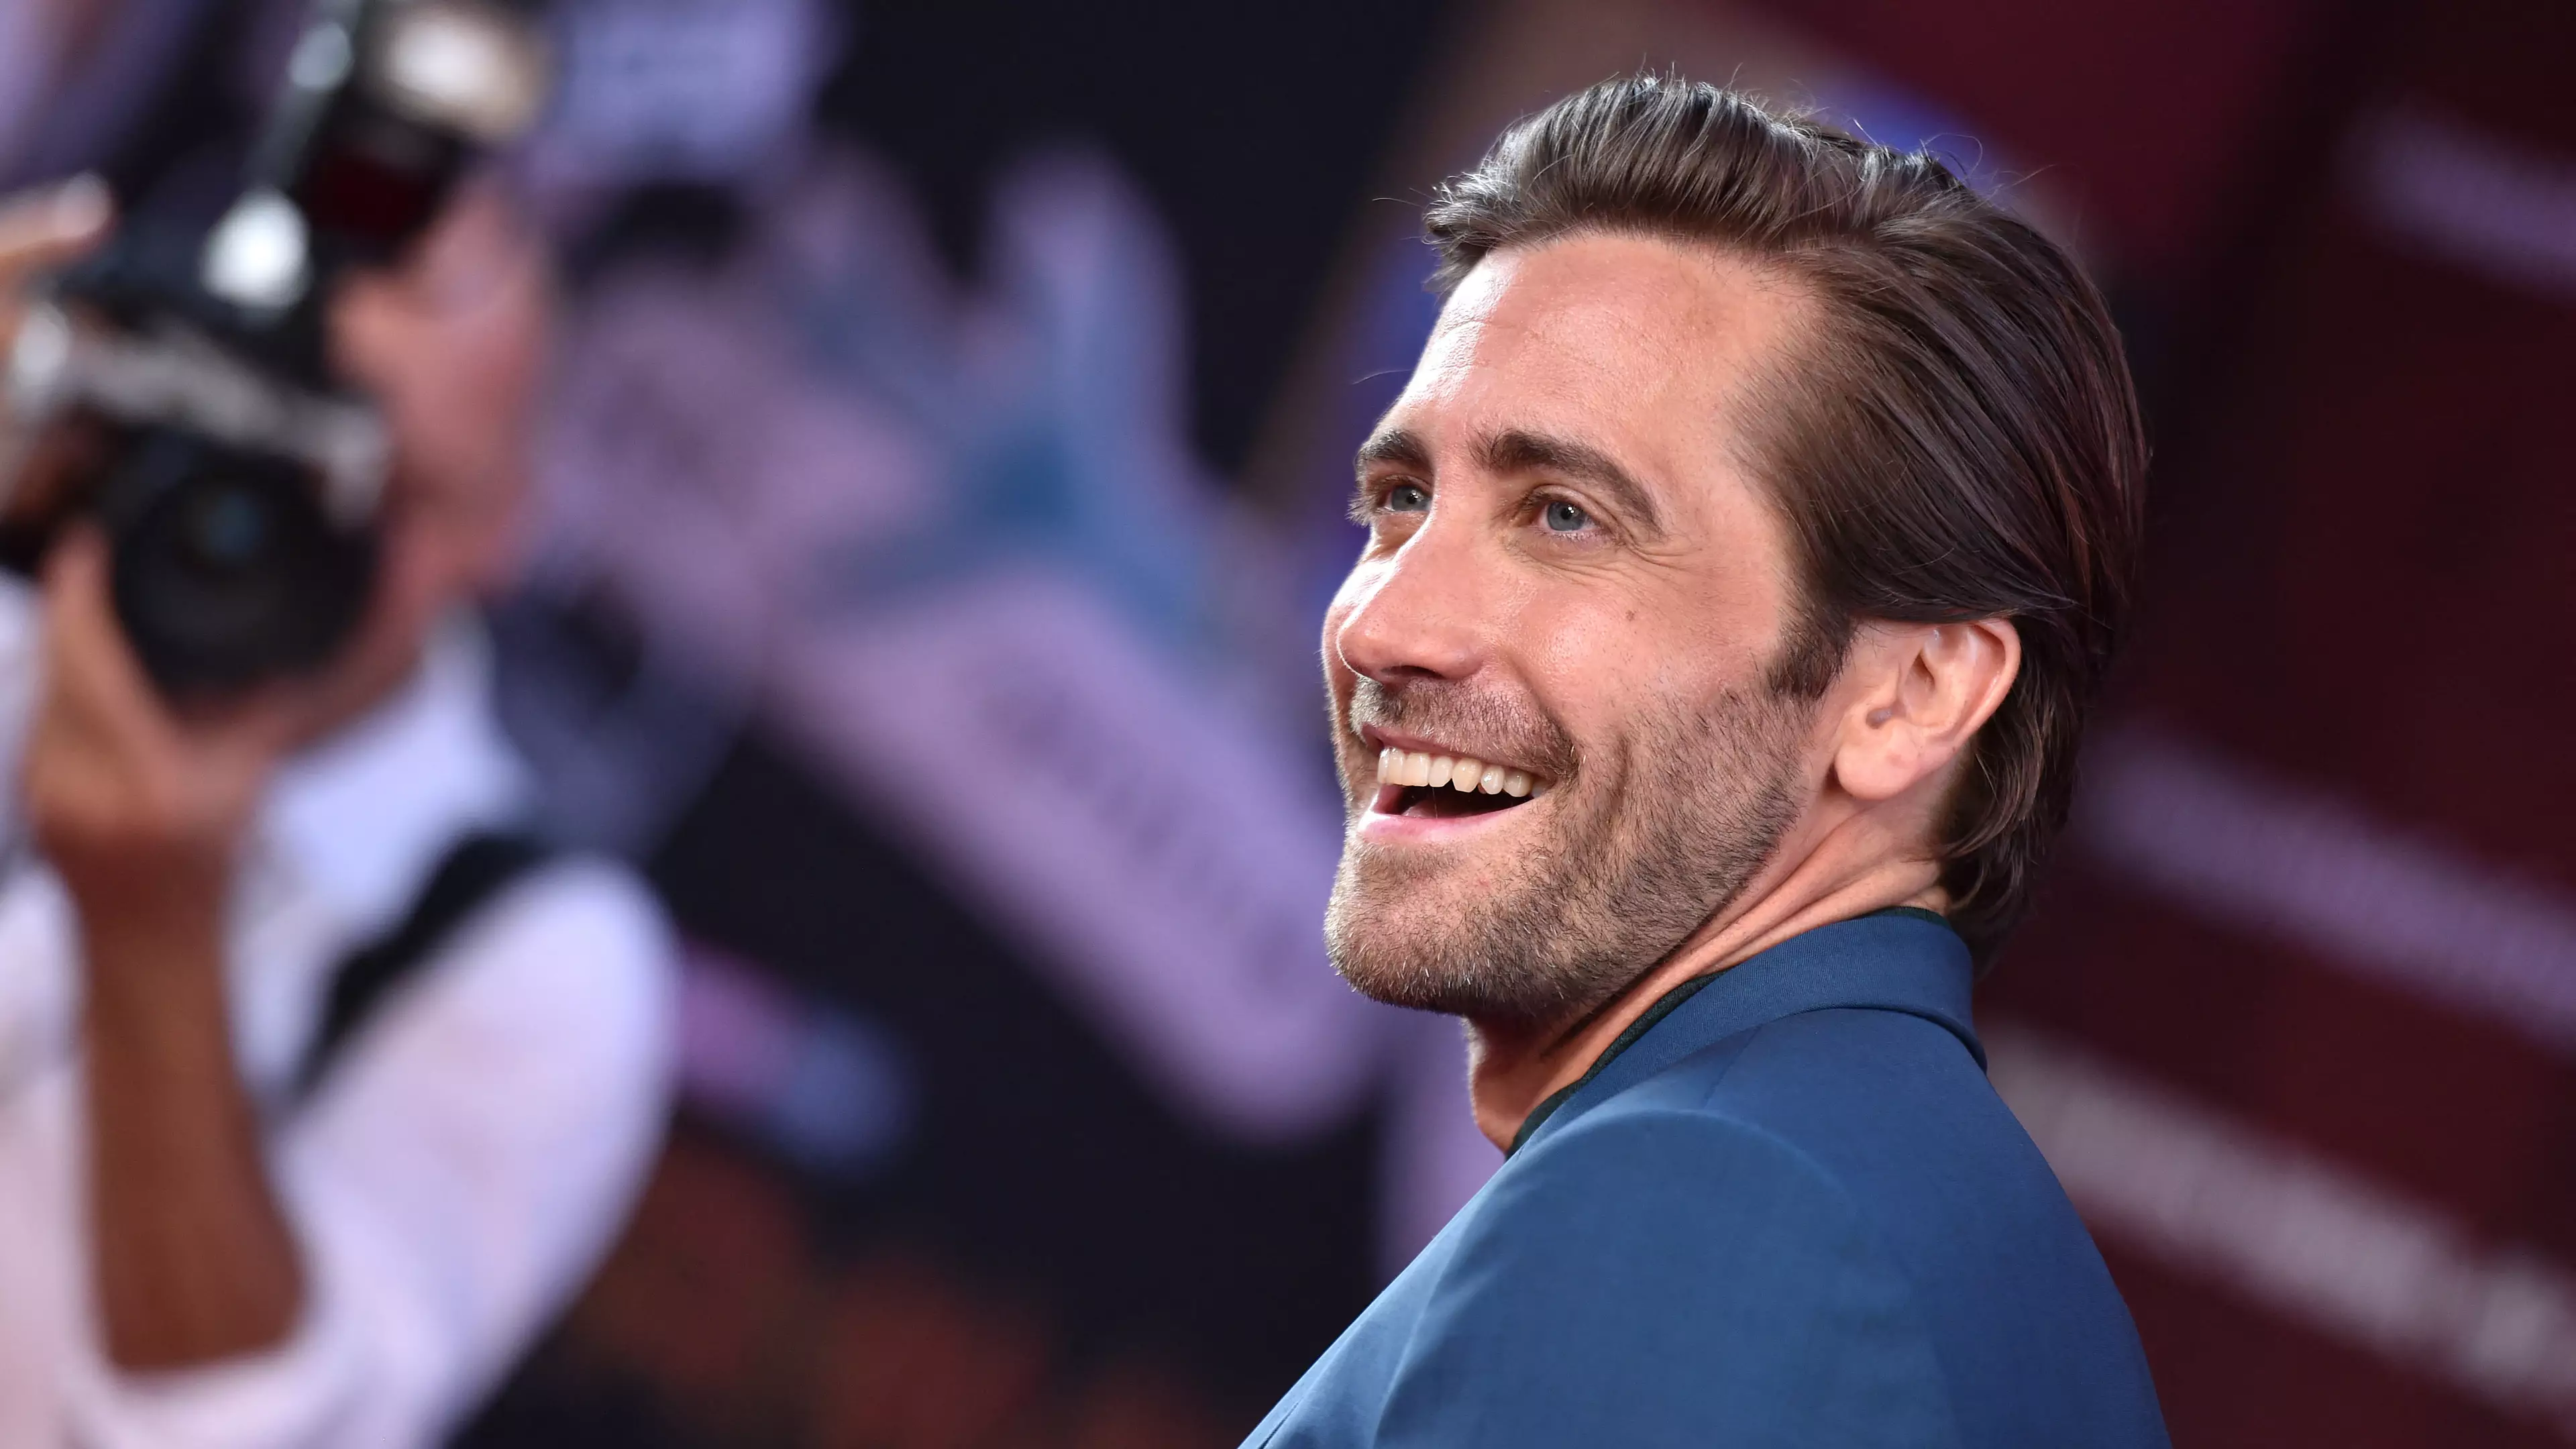 Jake Gyllenhaal And Oscar Isaac To Star In Film About The Making Of The Godfather